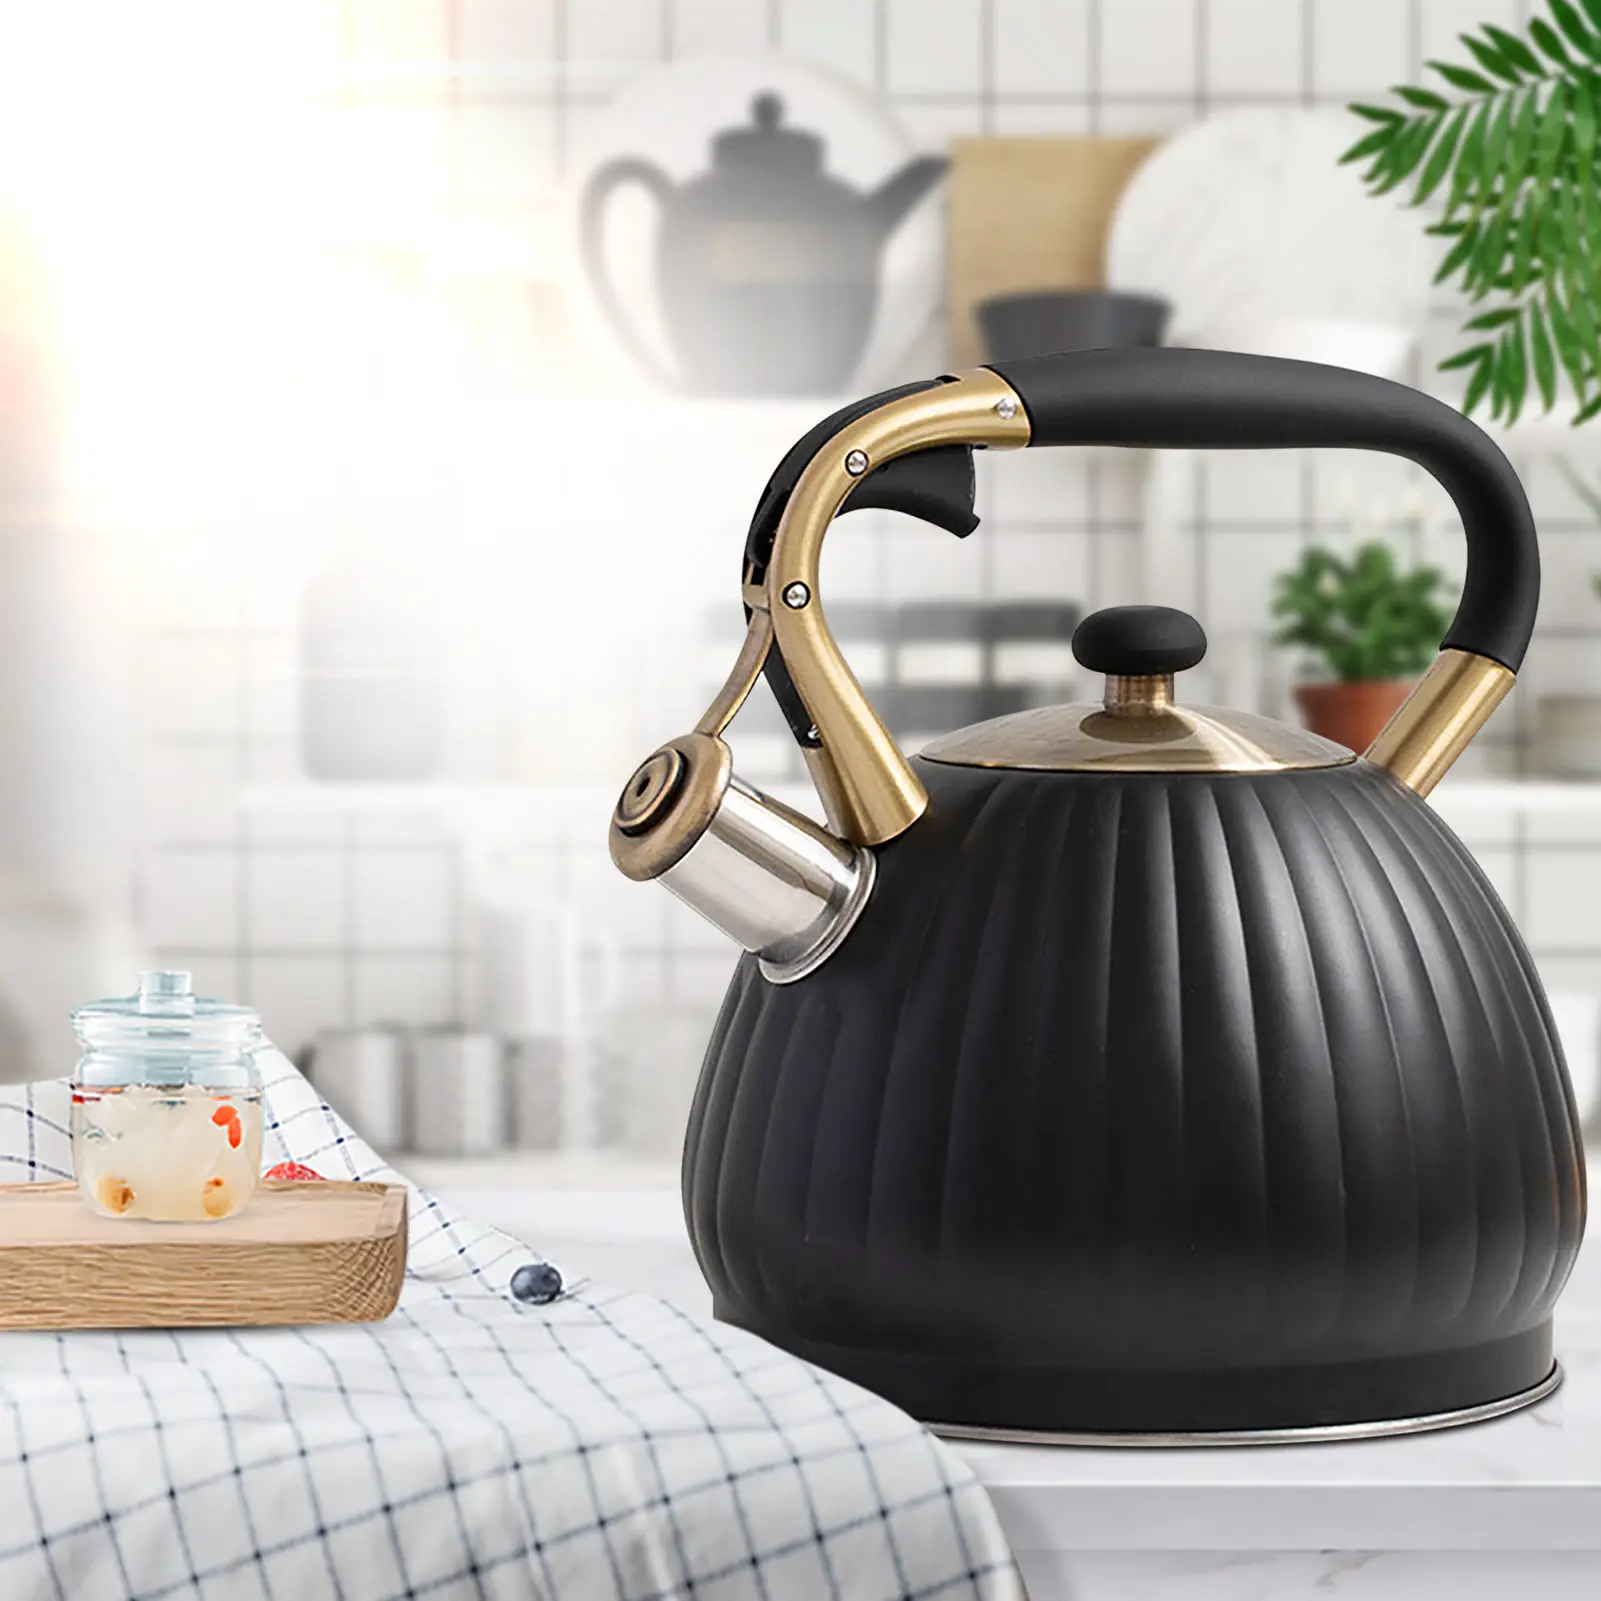 

Whistling Tea Kettles Stainless Steel Whistling Teapot Stovetop With Boils Faster BottomErgonomic Cookware Kettle Heat